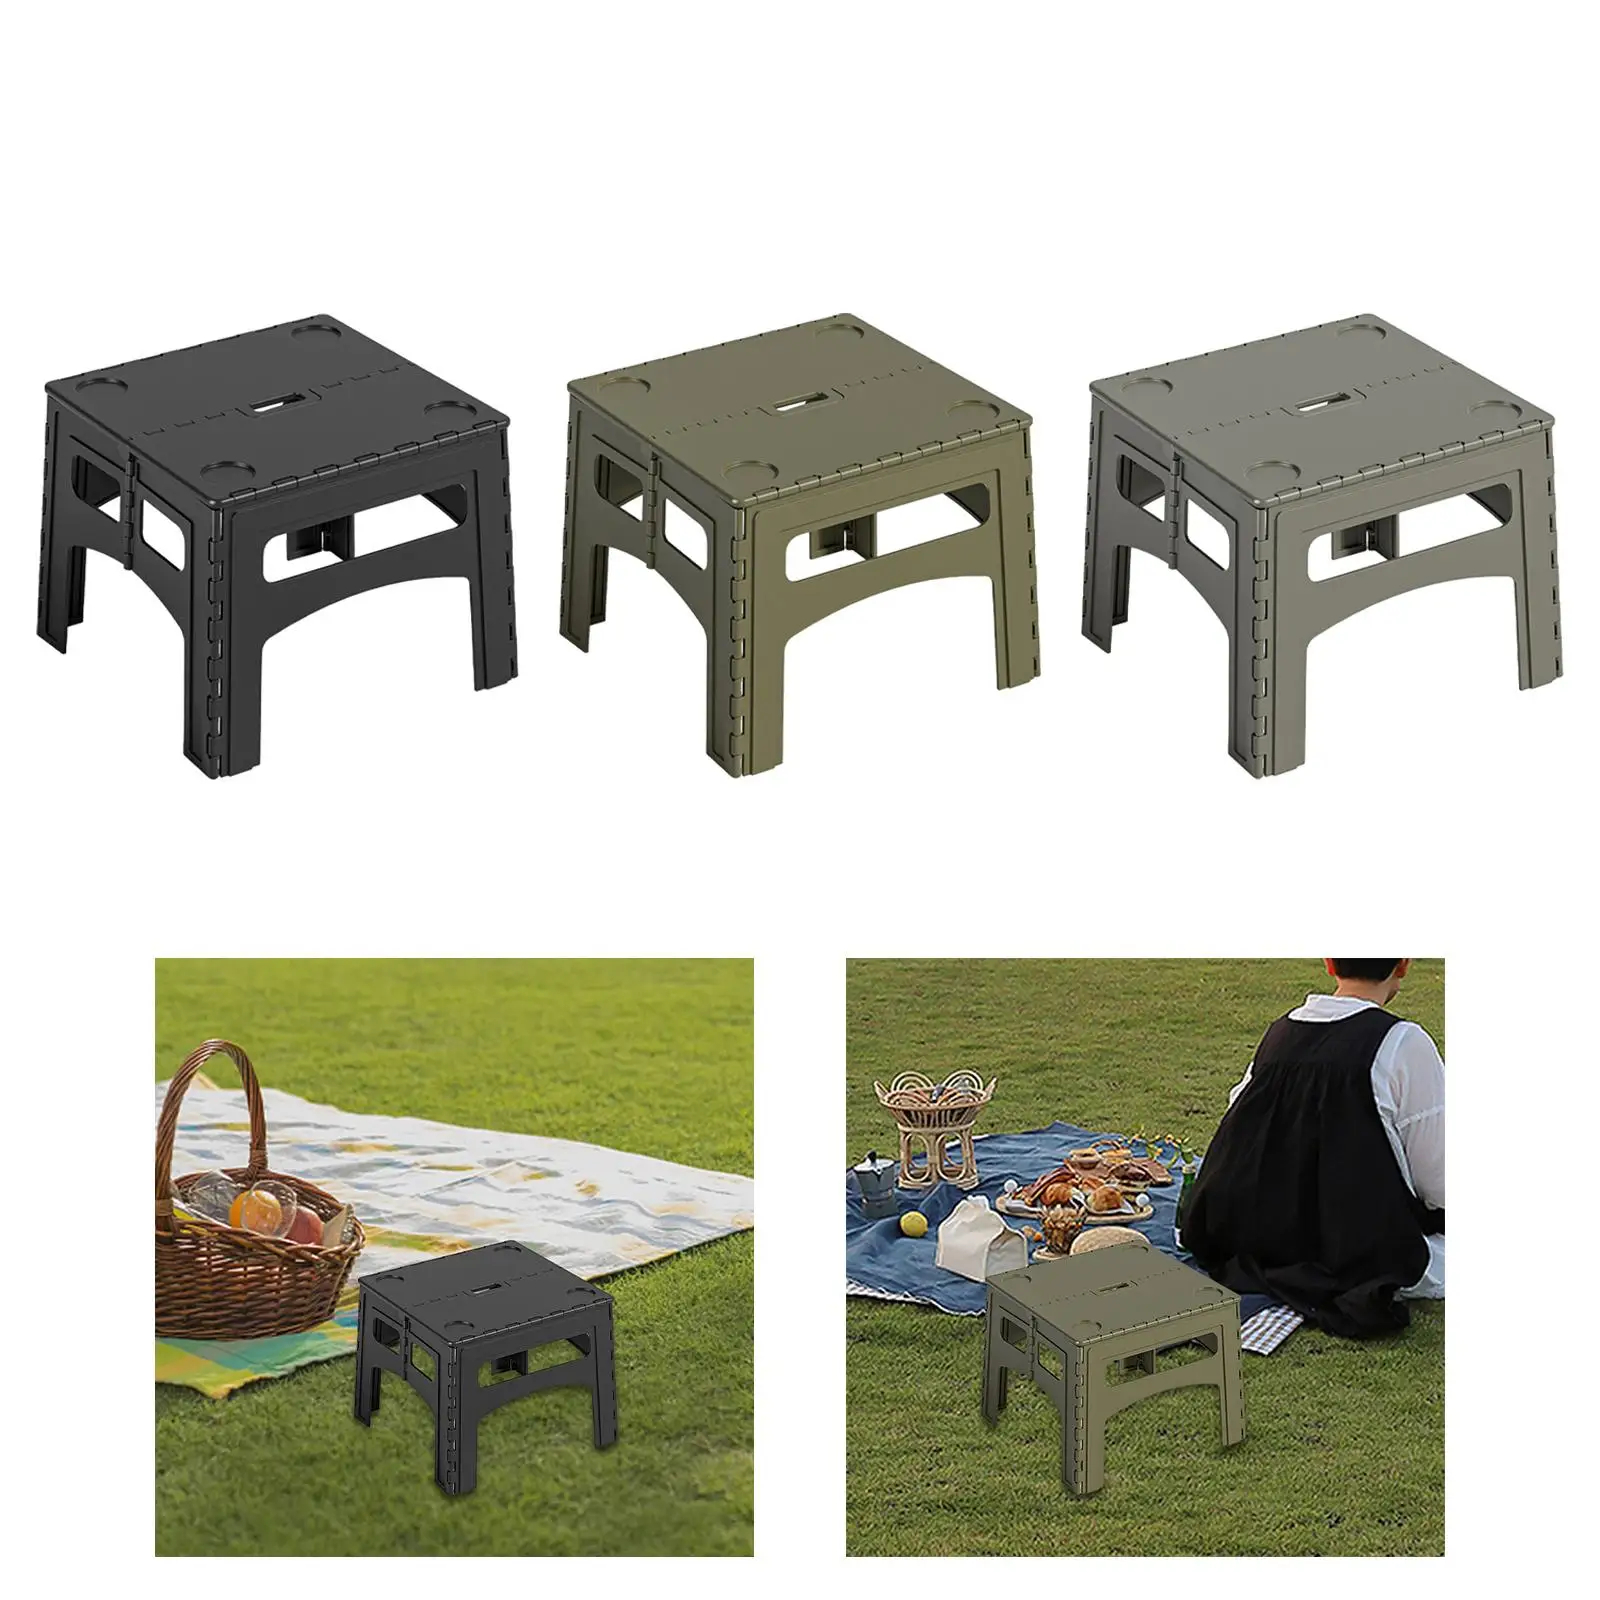 Foldable Picnic Table Portable Camping Table Desk Camp Table Ultralight Outdoor